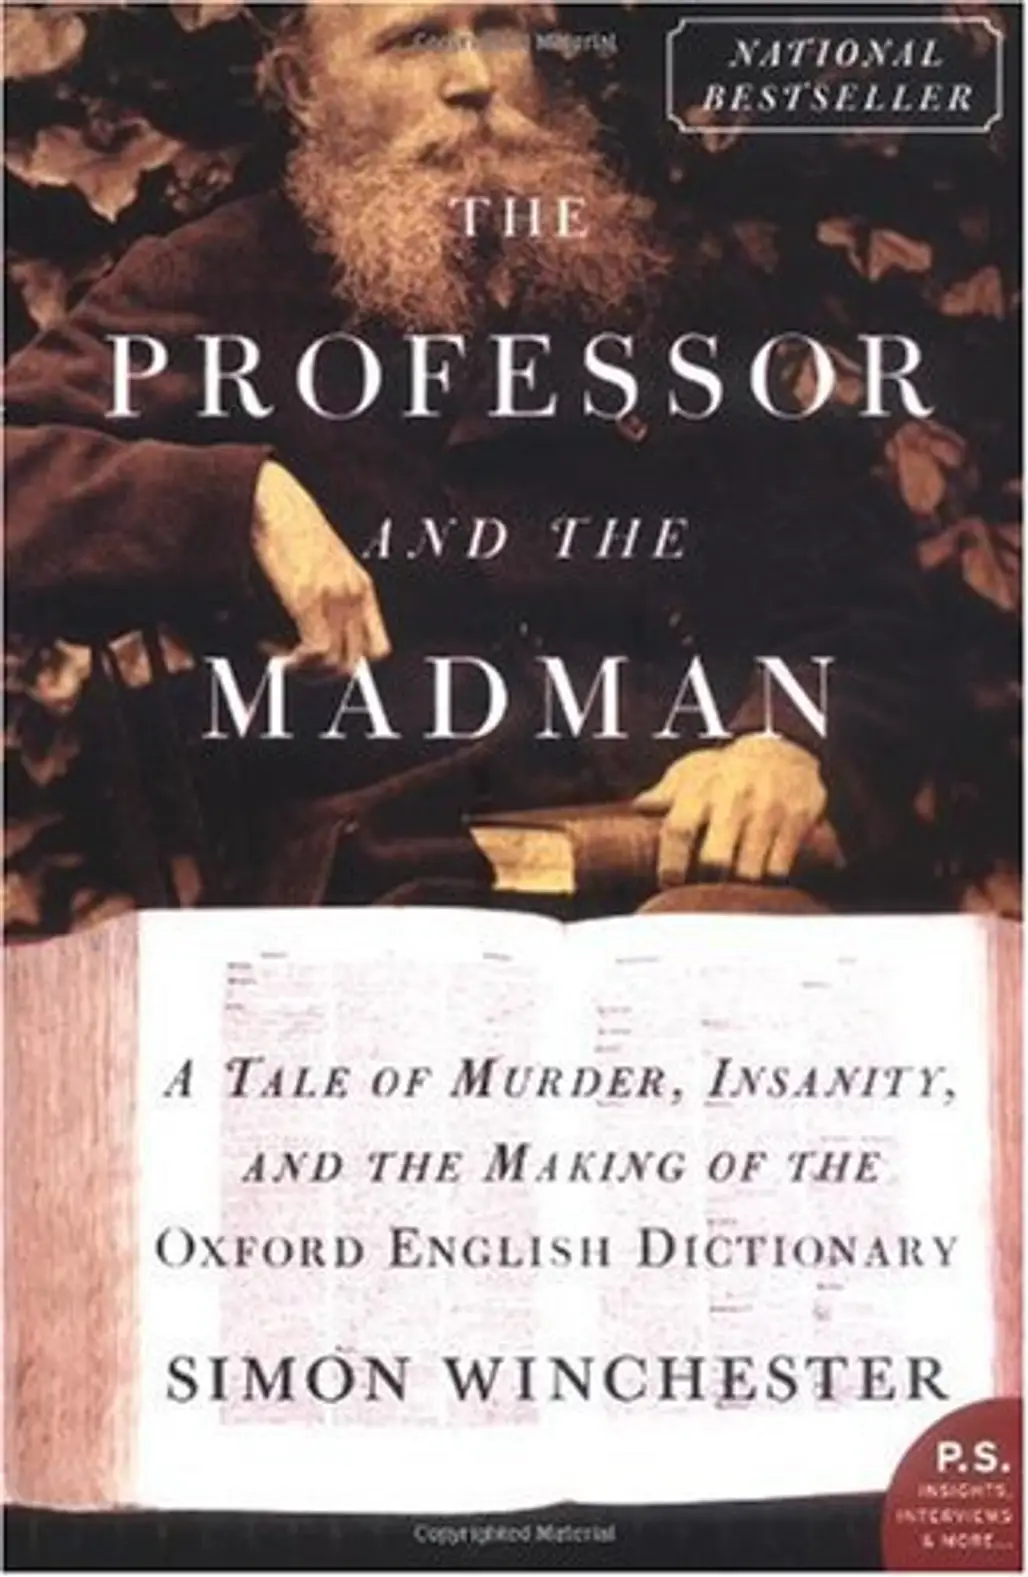 “the Professor and the Madman” by Simon Winchester